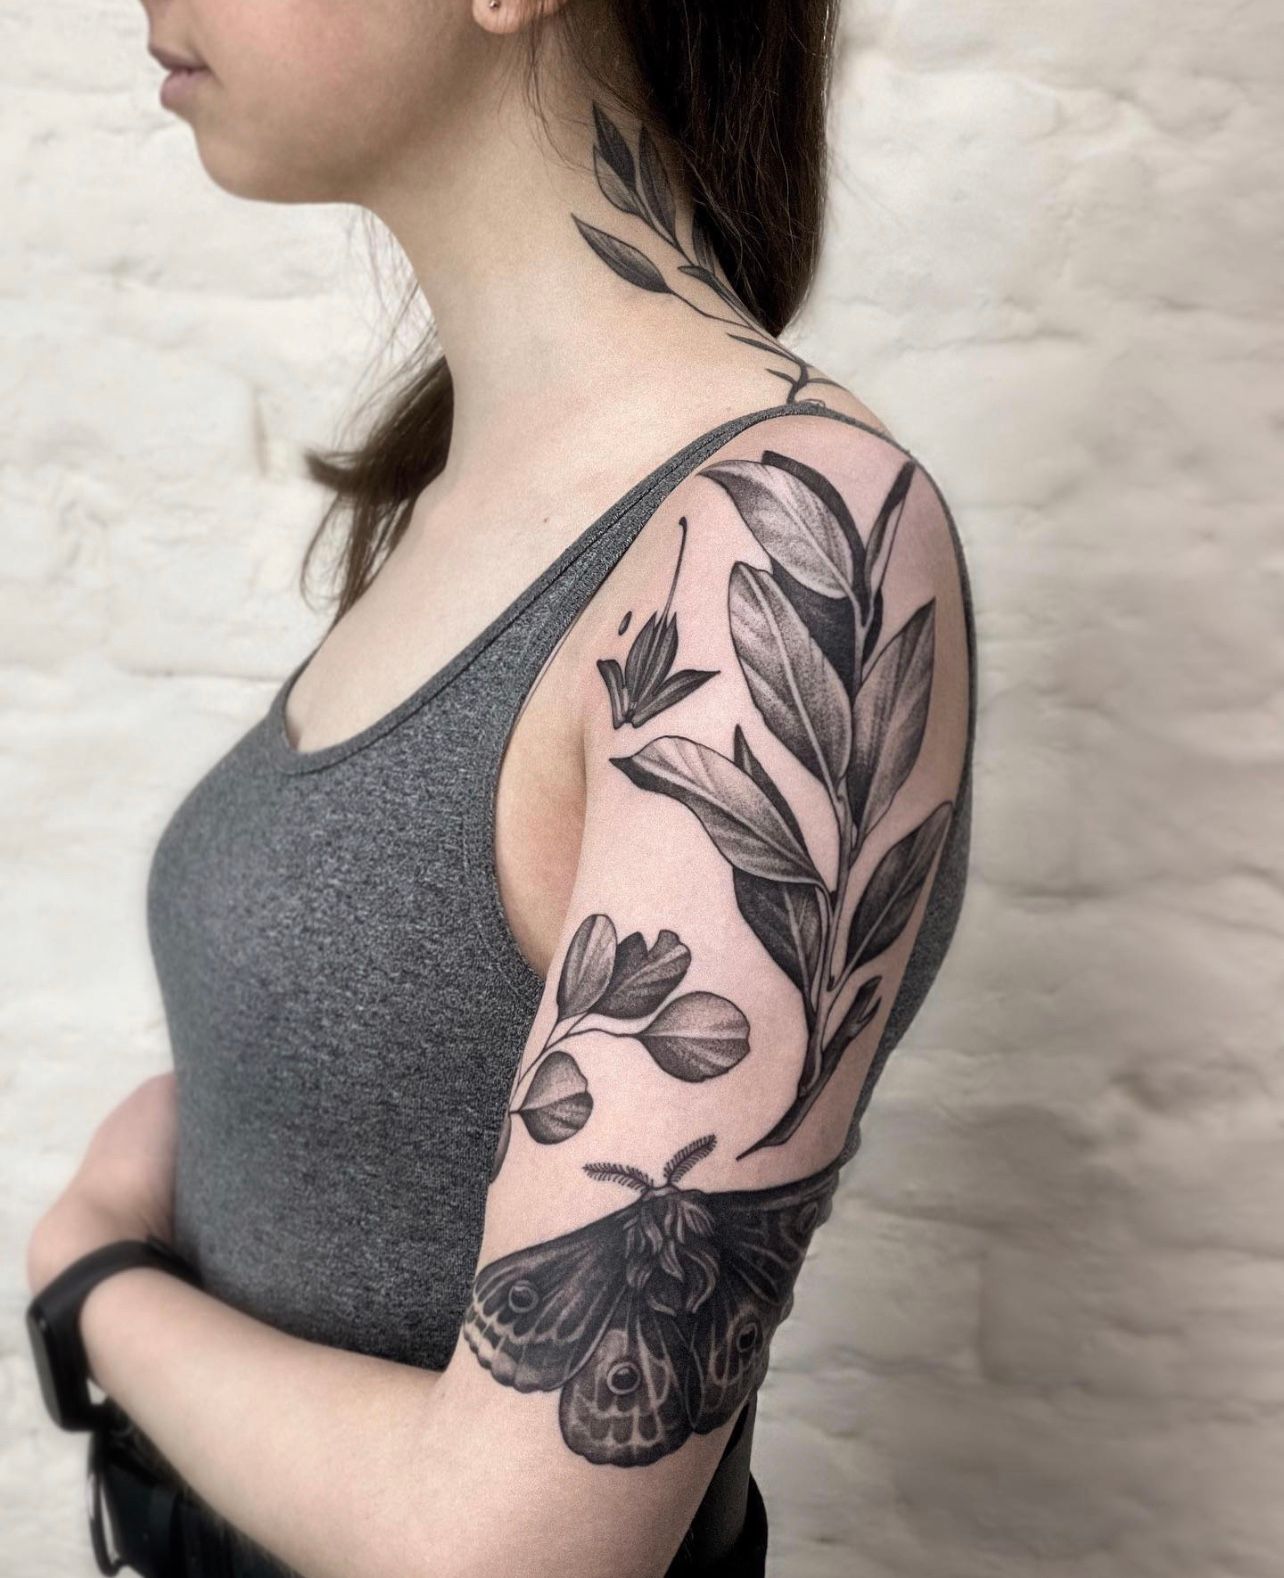 Catalyst Tattoo - Branch of ginkgo leaves & some wishful thinking ✨✨ Orange  tones & foliages are my new obsession 🧡💛🧡💛🧡 . . • • Personalise your  very own tattoo with us.